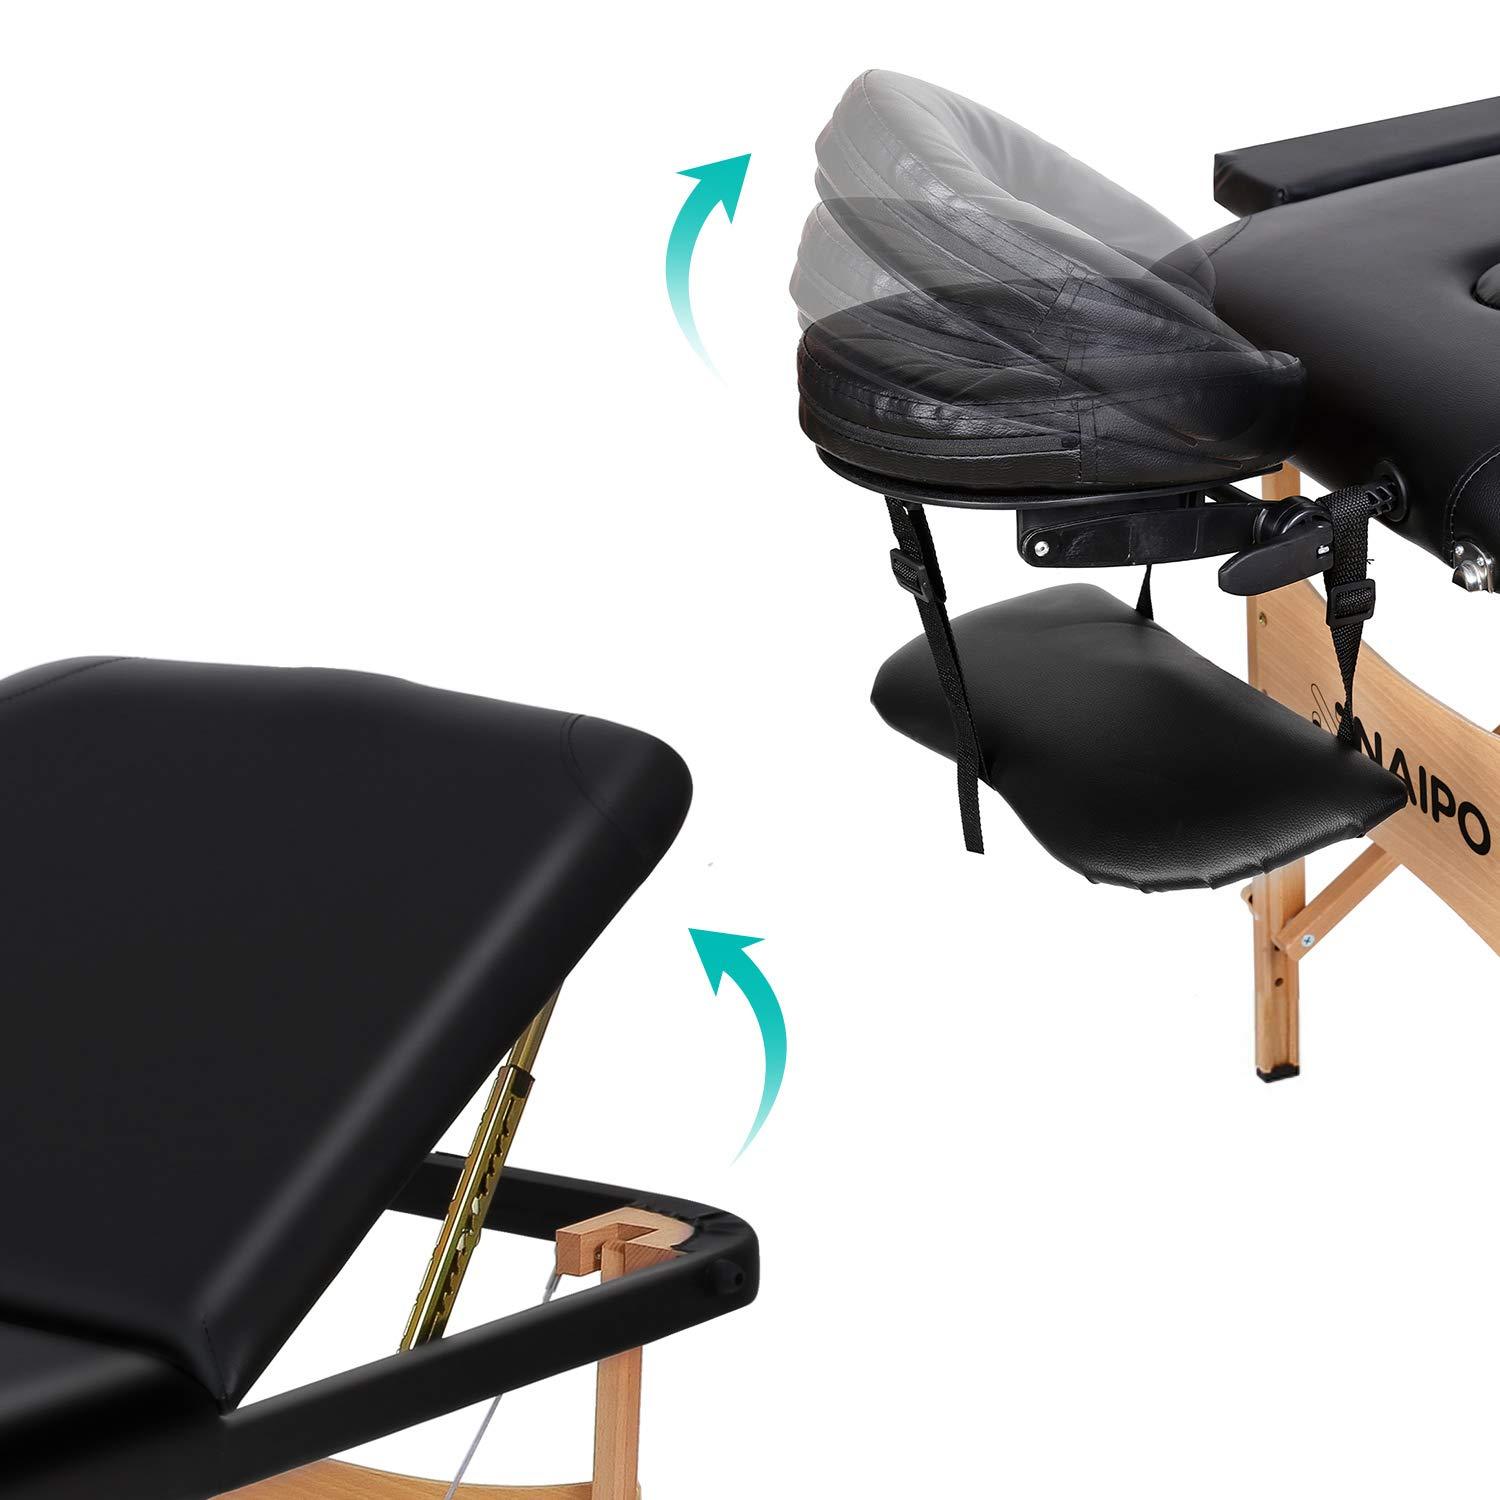 Load image into Gallery viewer, Naipo Portable Massage Table Professional Adjustable Folding Bed with 3 Sections Wooden Frame Ergonomic Headrest and Carrying Bag for Therapy Tattoo Salon Spa Facial Treatment - NAIPO
